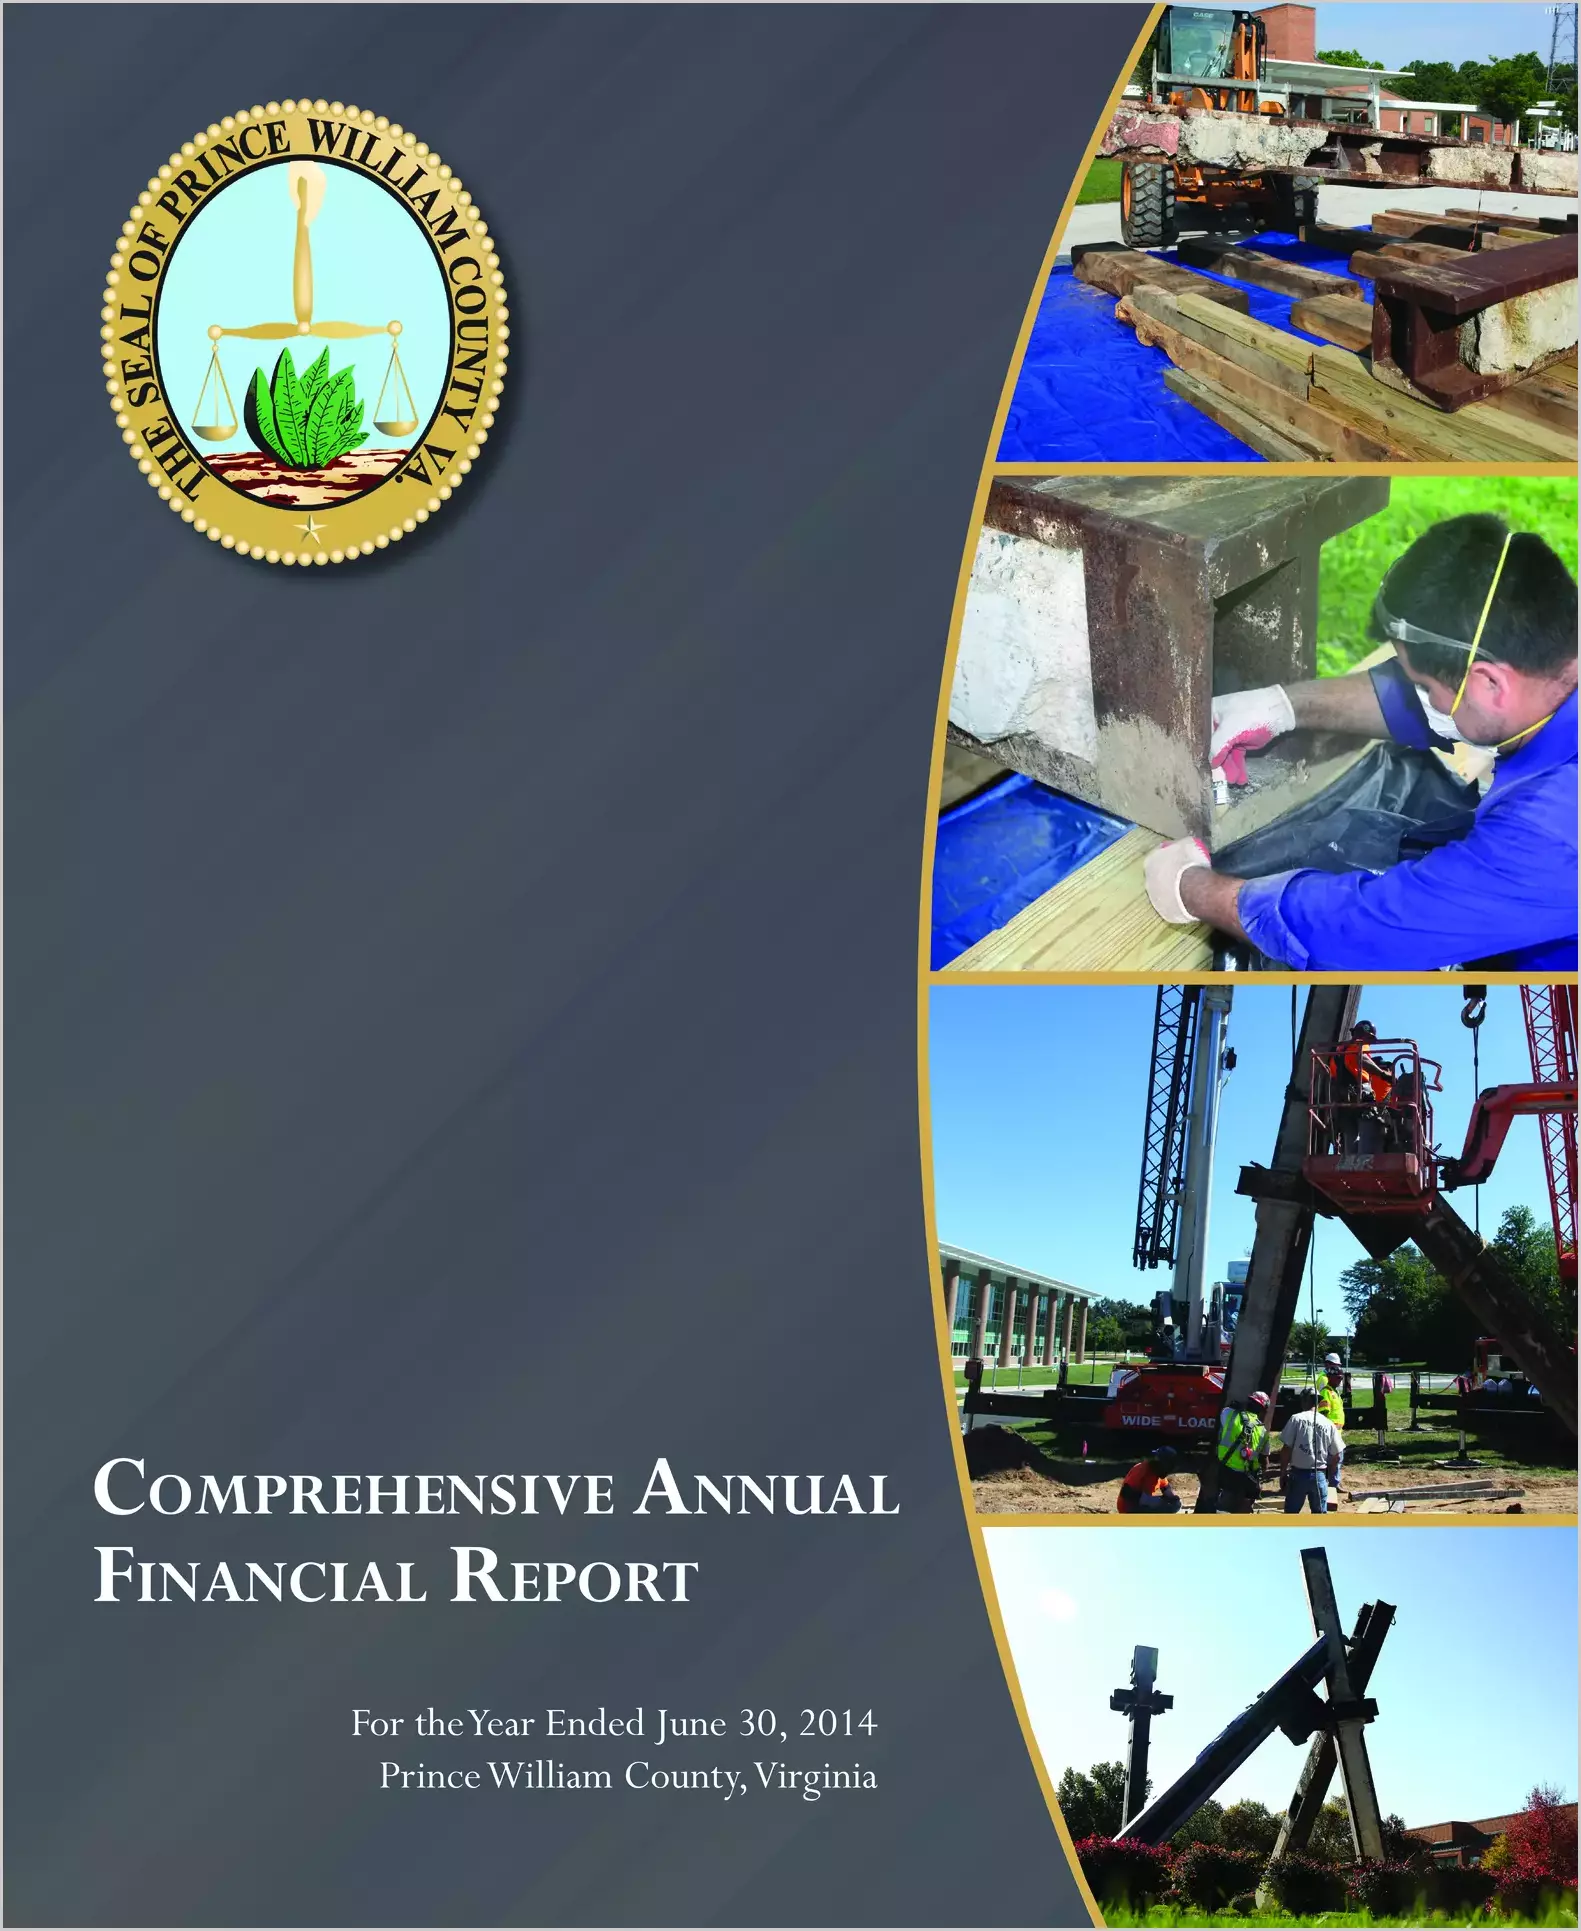 2014 Annual Financial Report for County of Prince William